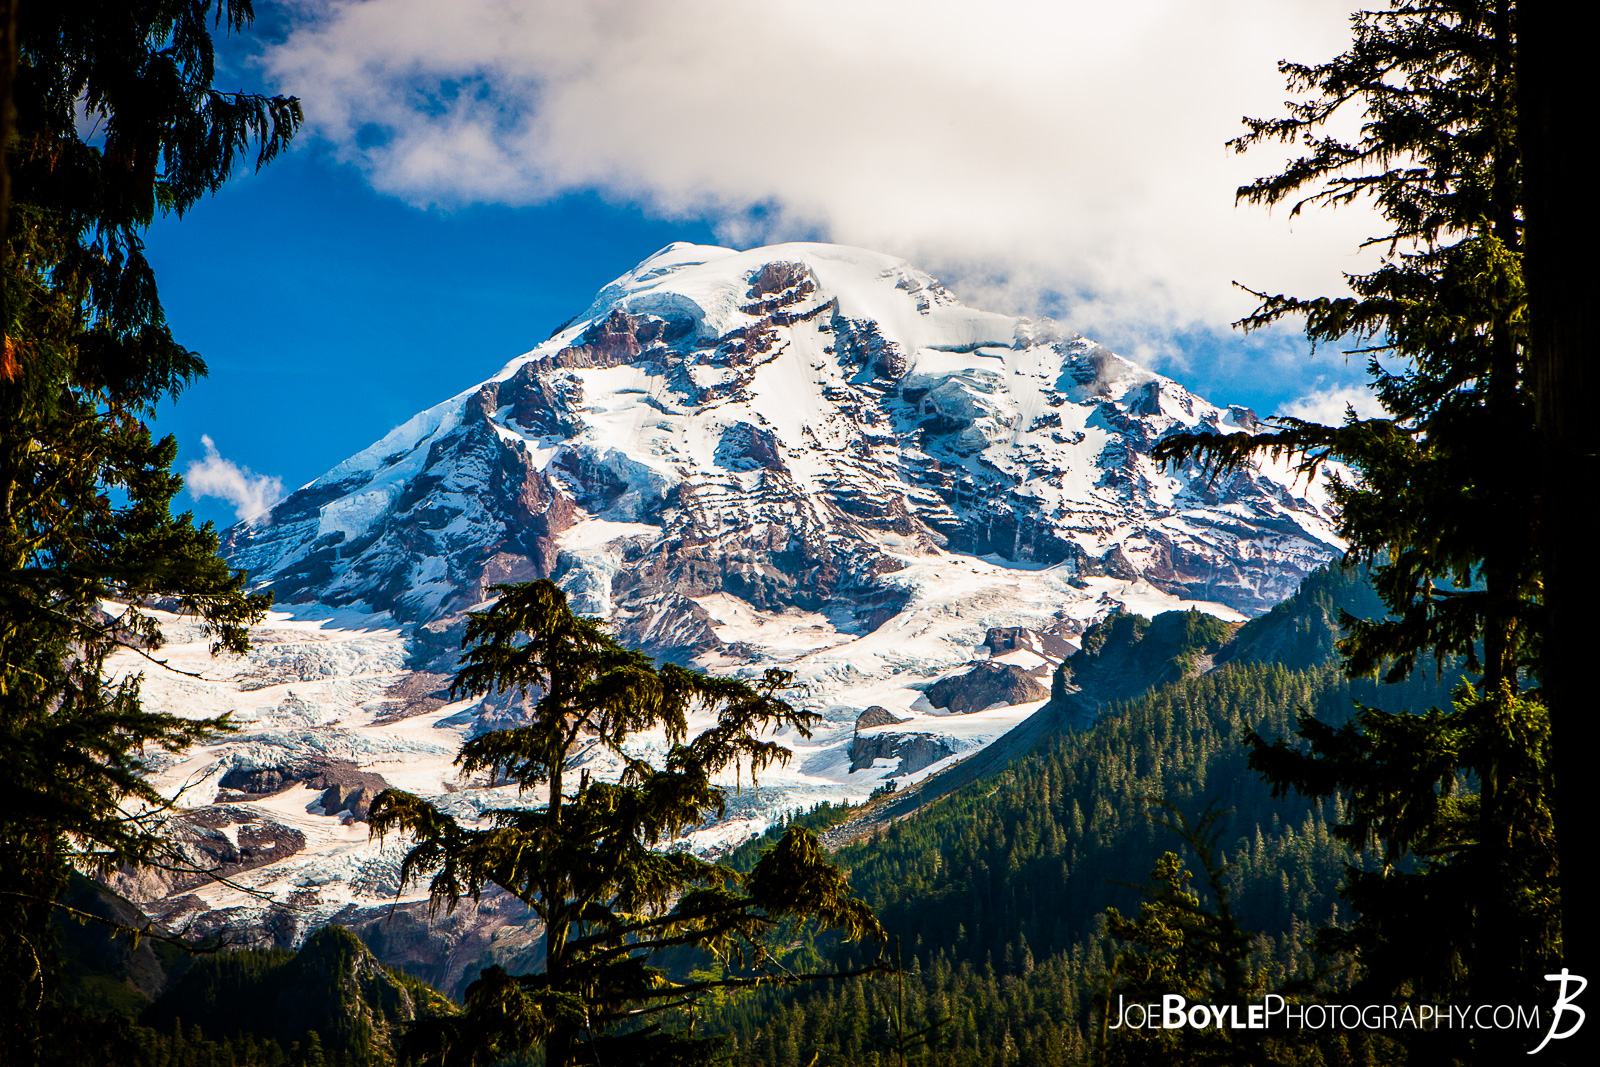  A view of Mount Rainier on our way to the Mowich River Campground. I love how the opening in the trees allowed for such a beautiful view! 